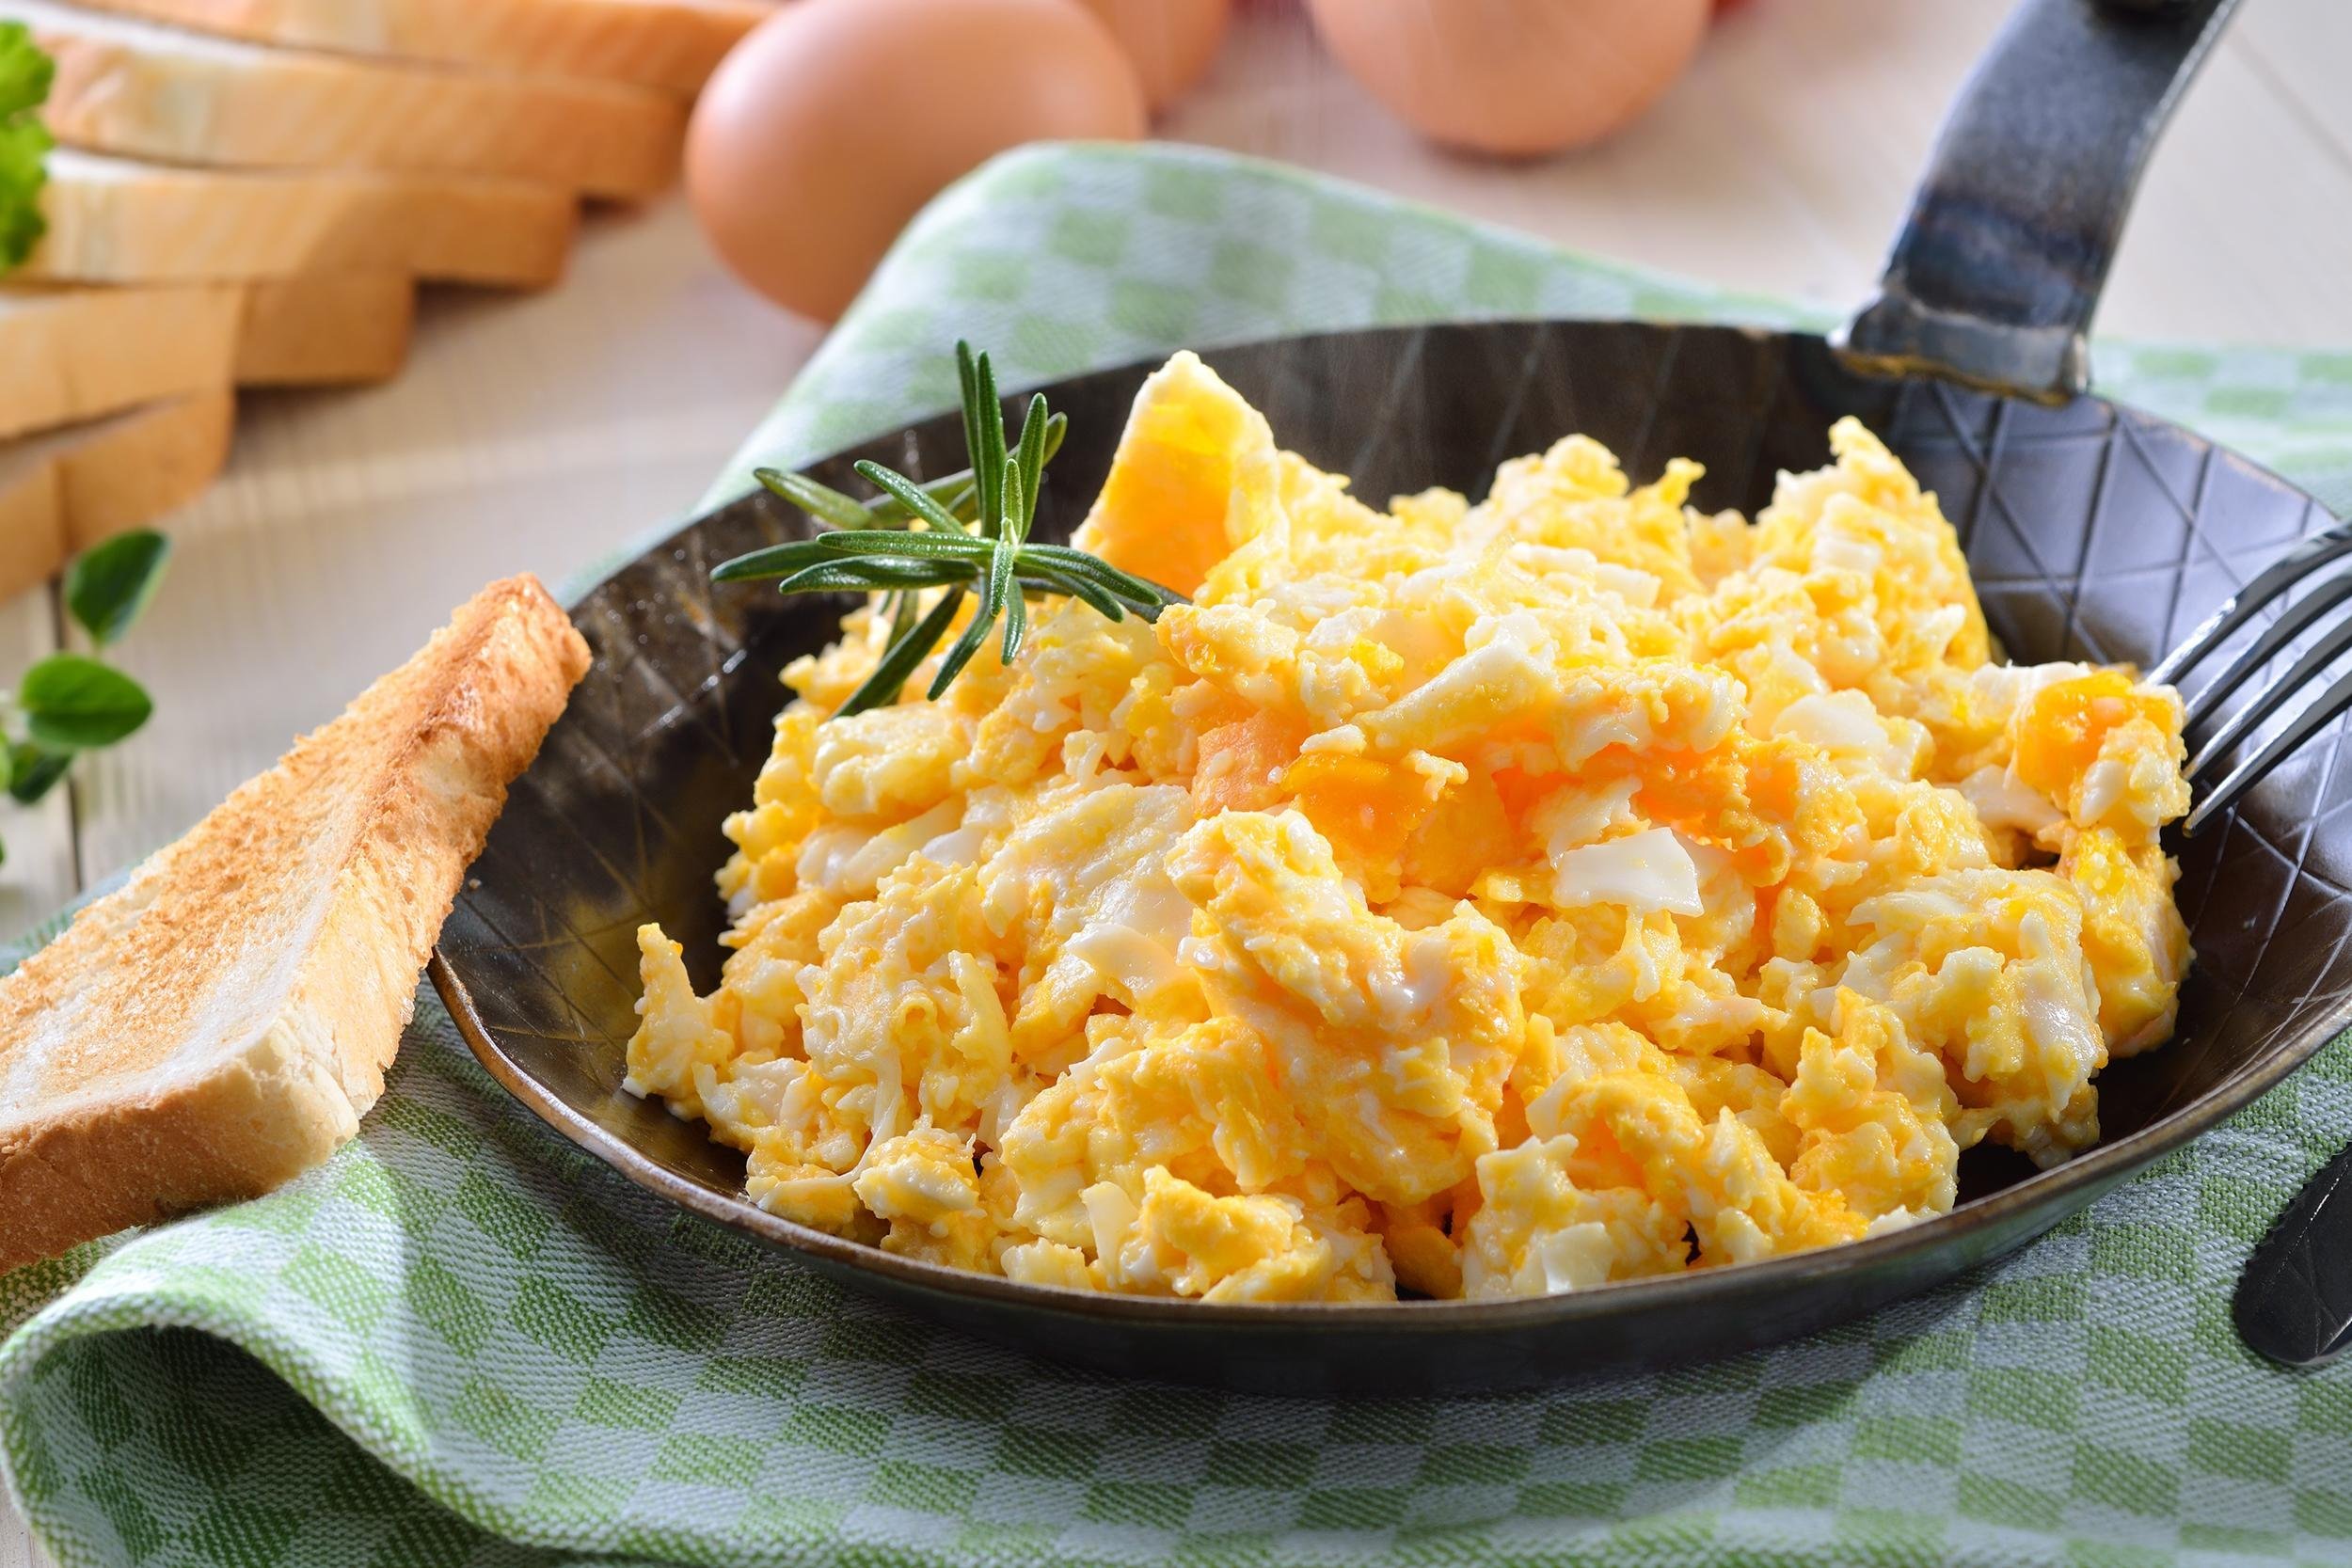 <p>According to expert tips, a quick and easy way to make scrambled eggs, a breakfast staple, is to cook them slowly over medium-low heat, which gives them a fluffy texture. To scramble two eggs, crack them into a bowl with 2 tablespoons of milk or cream and use a whisk to beat together. (The dairy makes the eggs creamier and less bland, but it is optional.) Pour the contents of the bowl into a hot, buttered pan. Let the eggs sit for half a minute to a minute, until the bottom starts to set. Add pepper and salt to taste, along with any additional flavoring such as herbs or shredded sharp cheese. Use a silicone spatula or wooden spoon to move the eggs gently around the pan. After a minute or two, the eggs should start forming "curds" in the pan. When the eggs still look wet but there's no more liquid in the pan, turn off the heat. Like other fried eggs, scrambled eggs can be served with bacon or even in sandwiches for a perfect meal.</p>